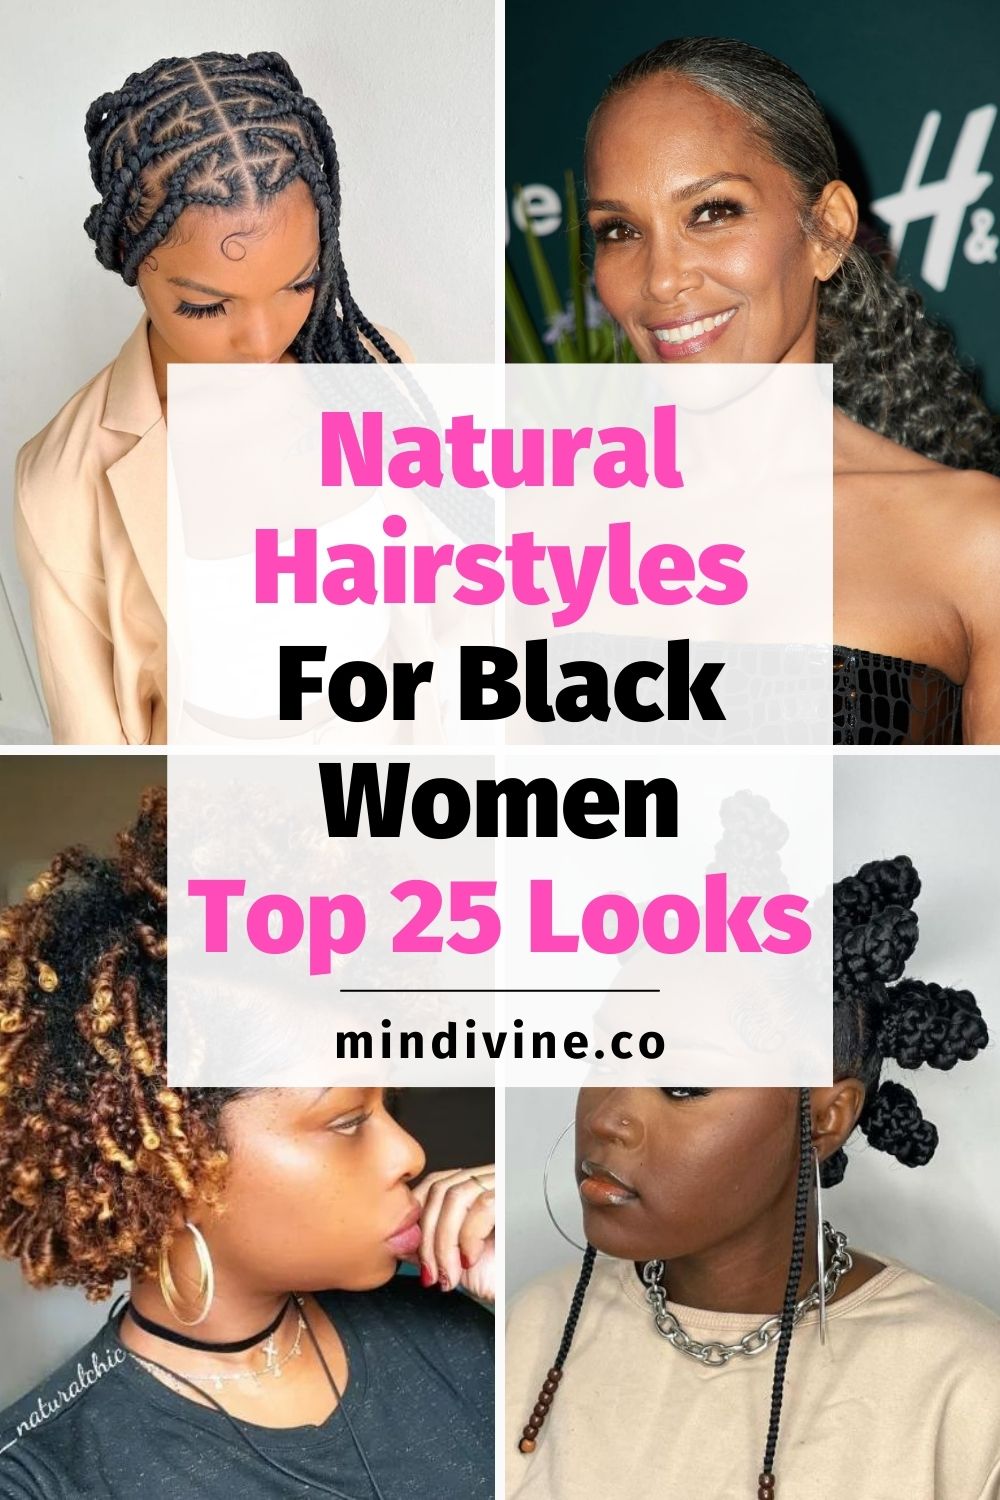 4 natural hairstyles for black women